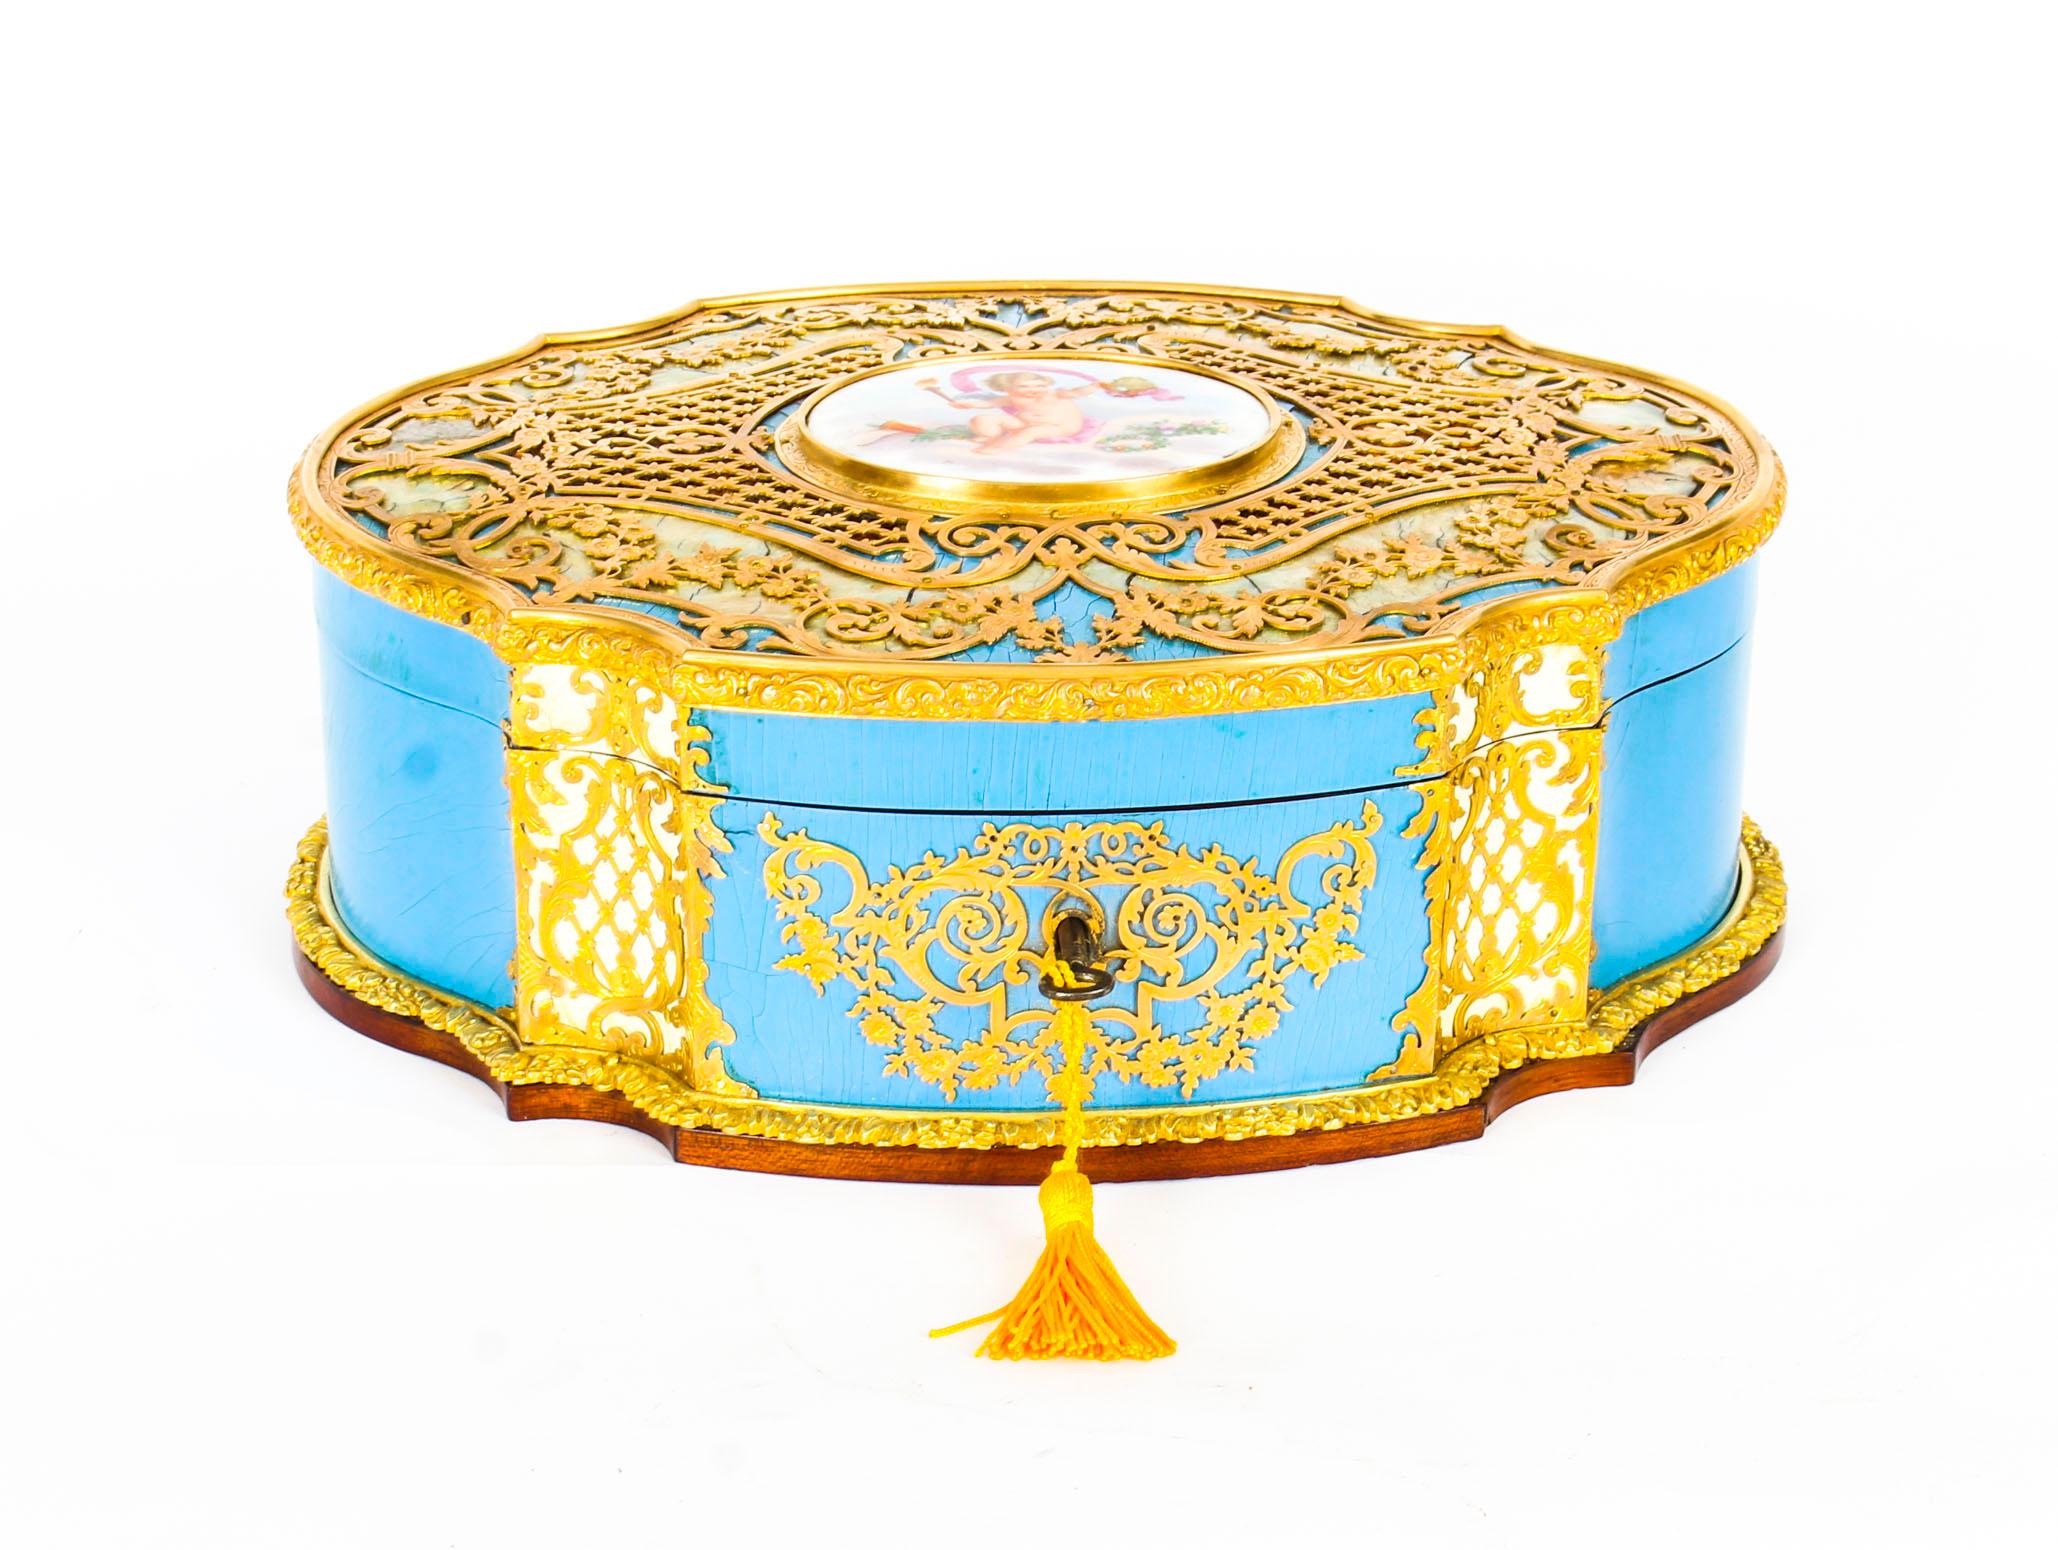 This is a magnificent antique French enamel, ormolu and mother of pearl casket fitted with a beautiful hand painted Sèvres Porcelain plaque of Cupid, later converted to a charming sewing box, dating from the 19th century.
 
This superb large